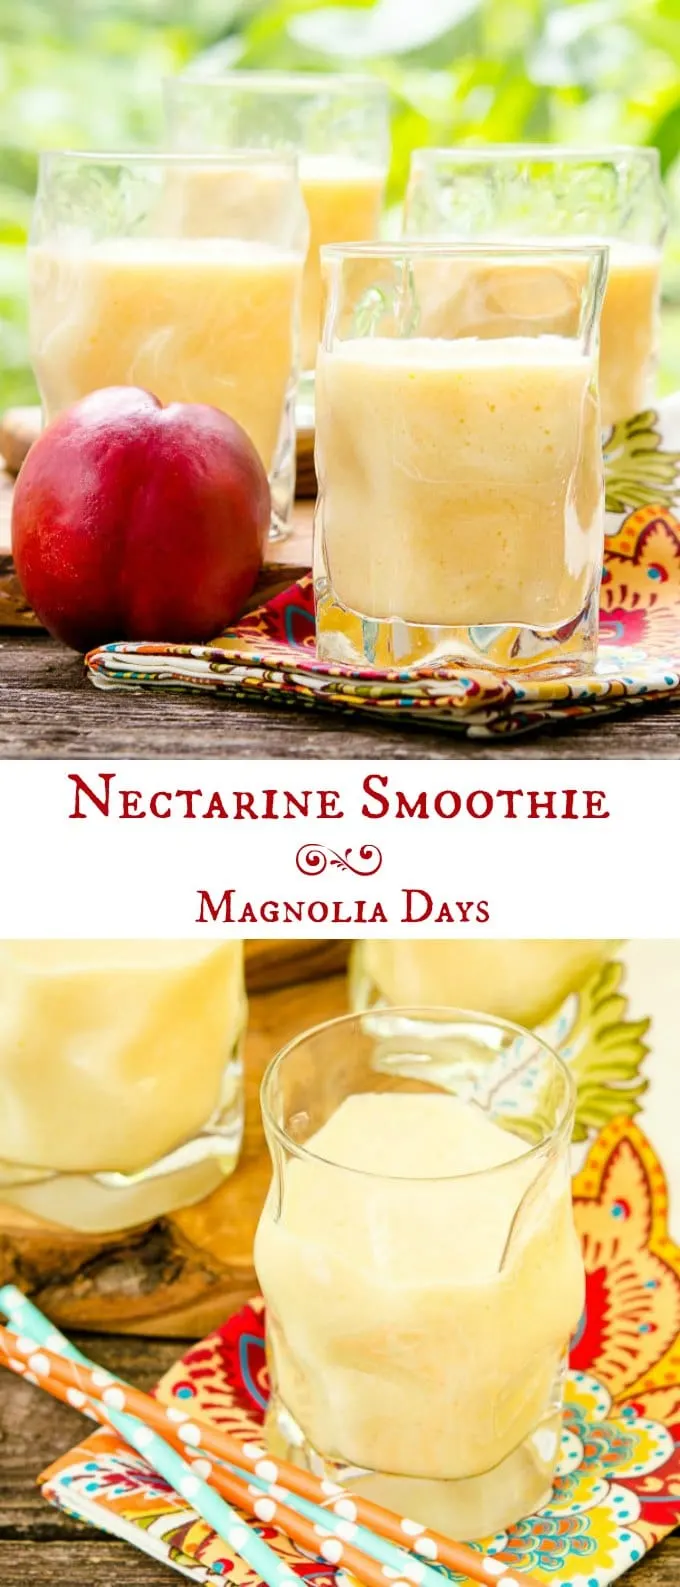 Nectarine Smoothie made with fresh fruit, yogurt, milk, and honey. It's cool, creamy, and has a delicate flavor.